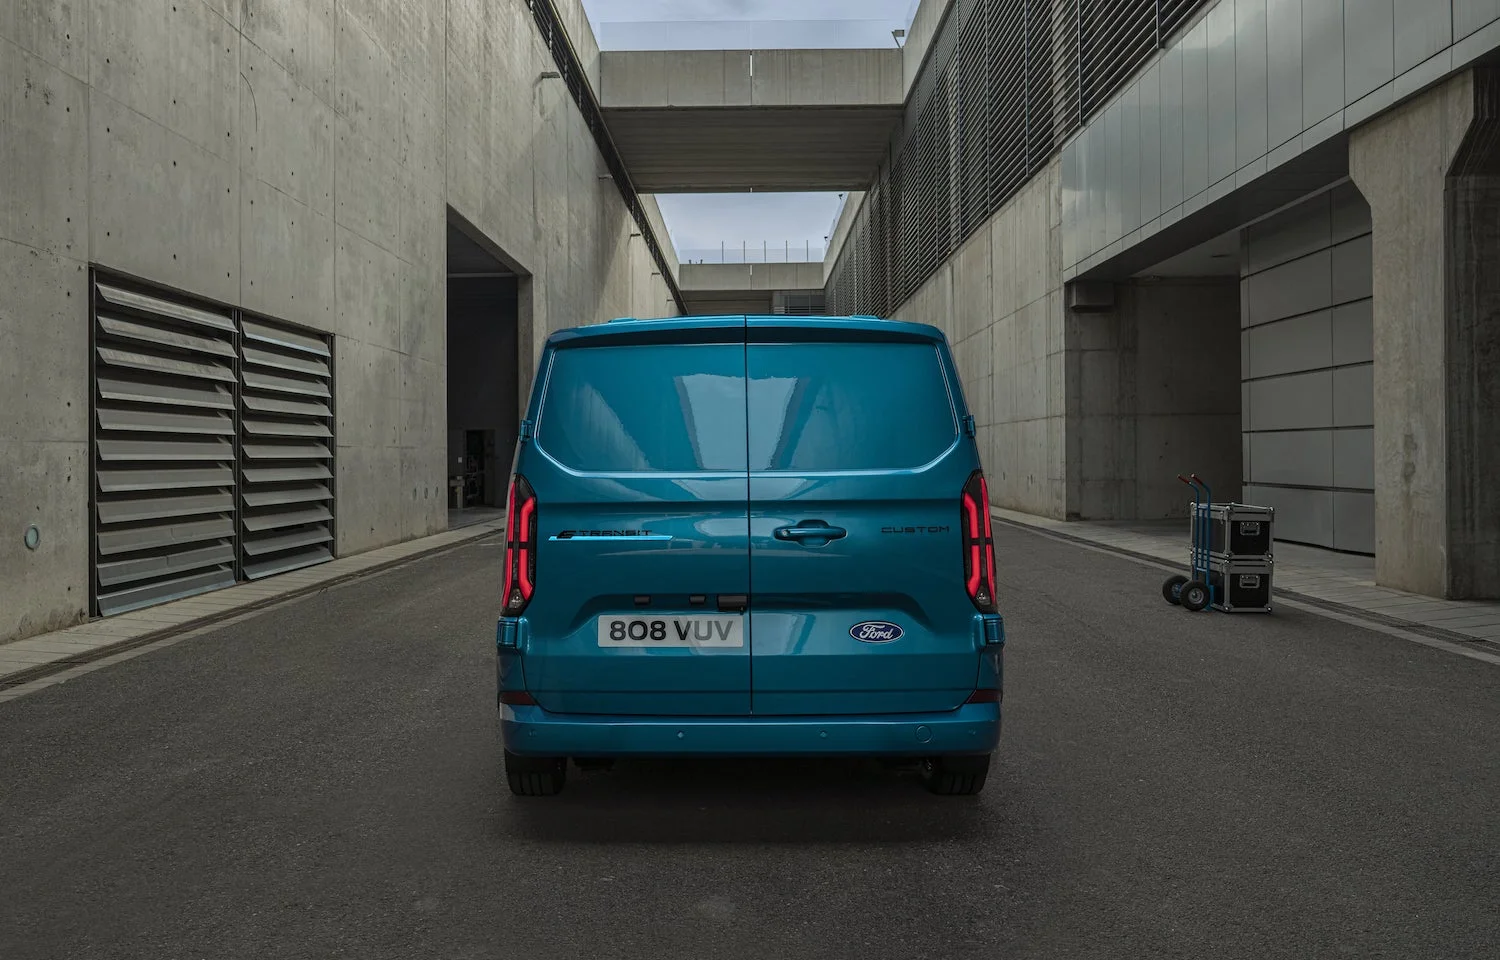 Ford Van Production In Europe Can Adapt To Customer's Needs